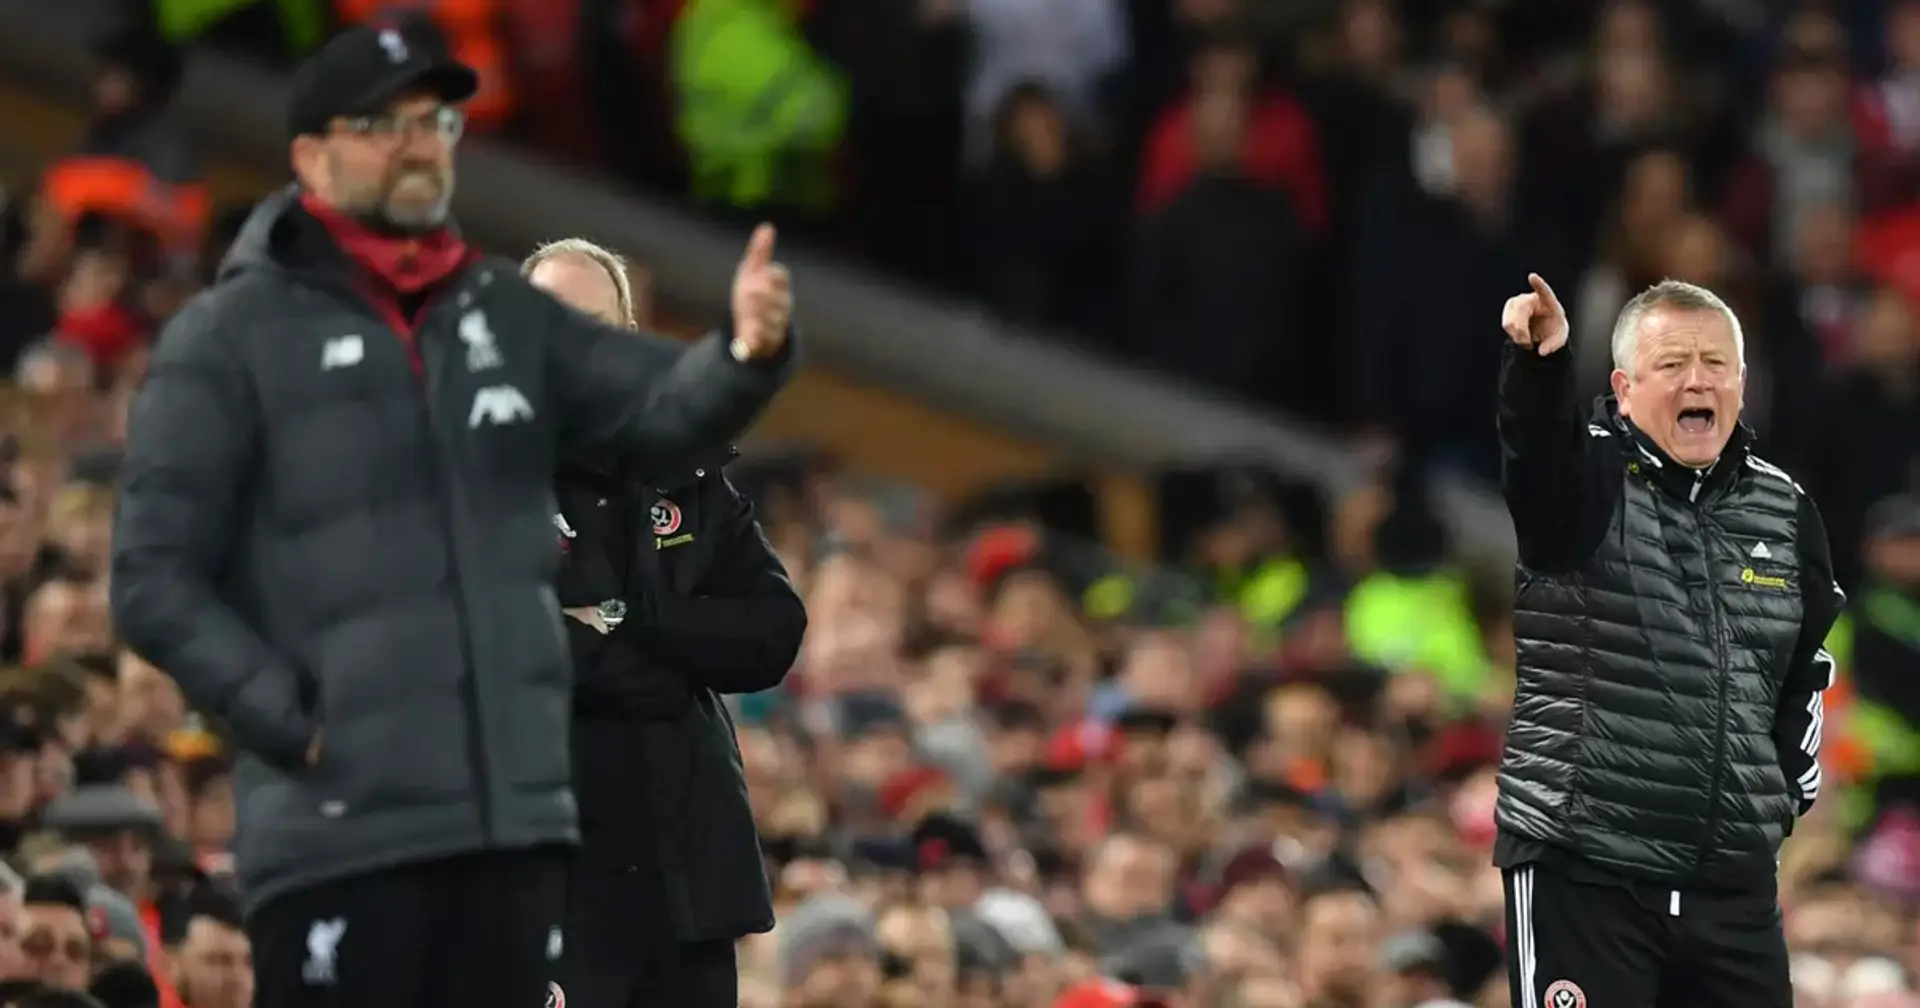 'It's ludicrous that club bias is brought into this': Reds fan on Klopp-vs-Wilder spat